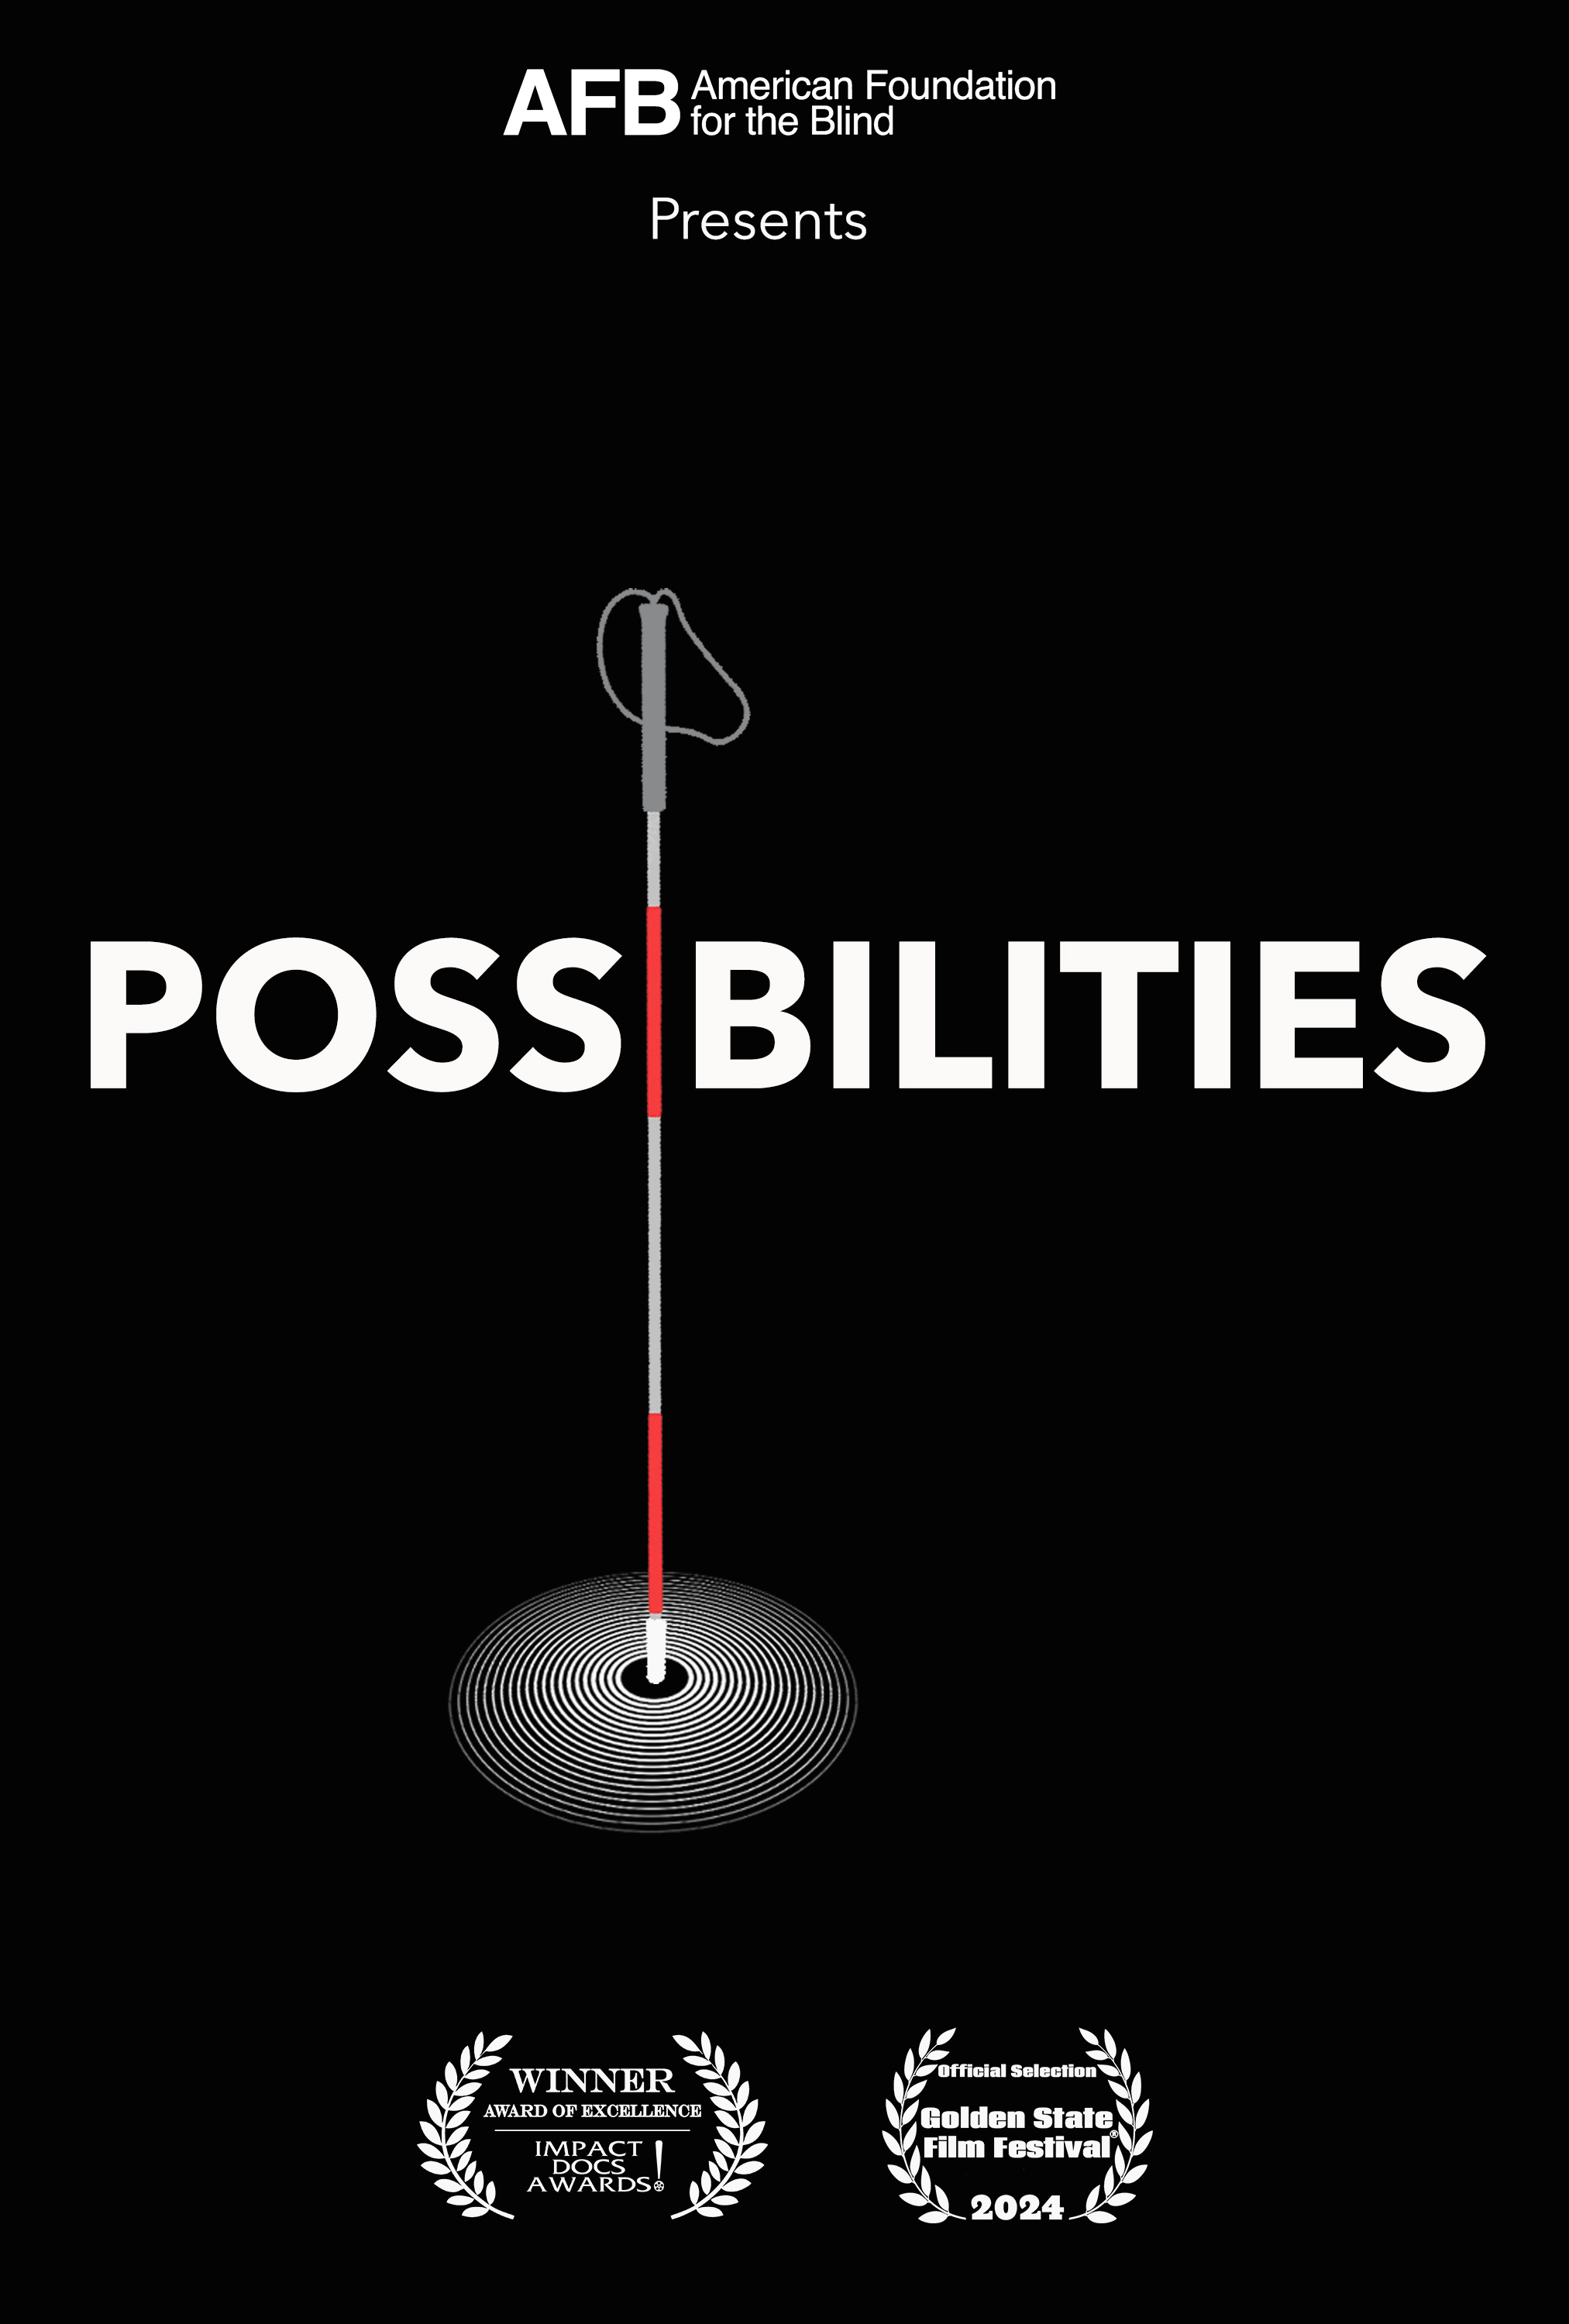 The American Foundation for the Blind presents Possibilities. Two Laurel Awards.